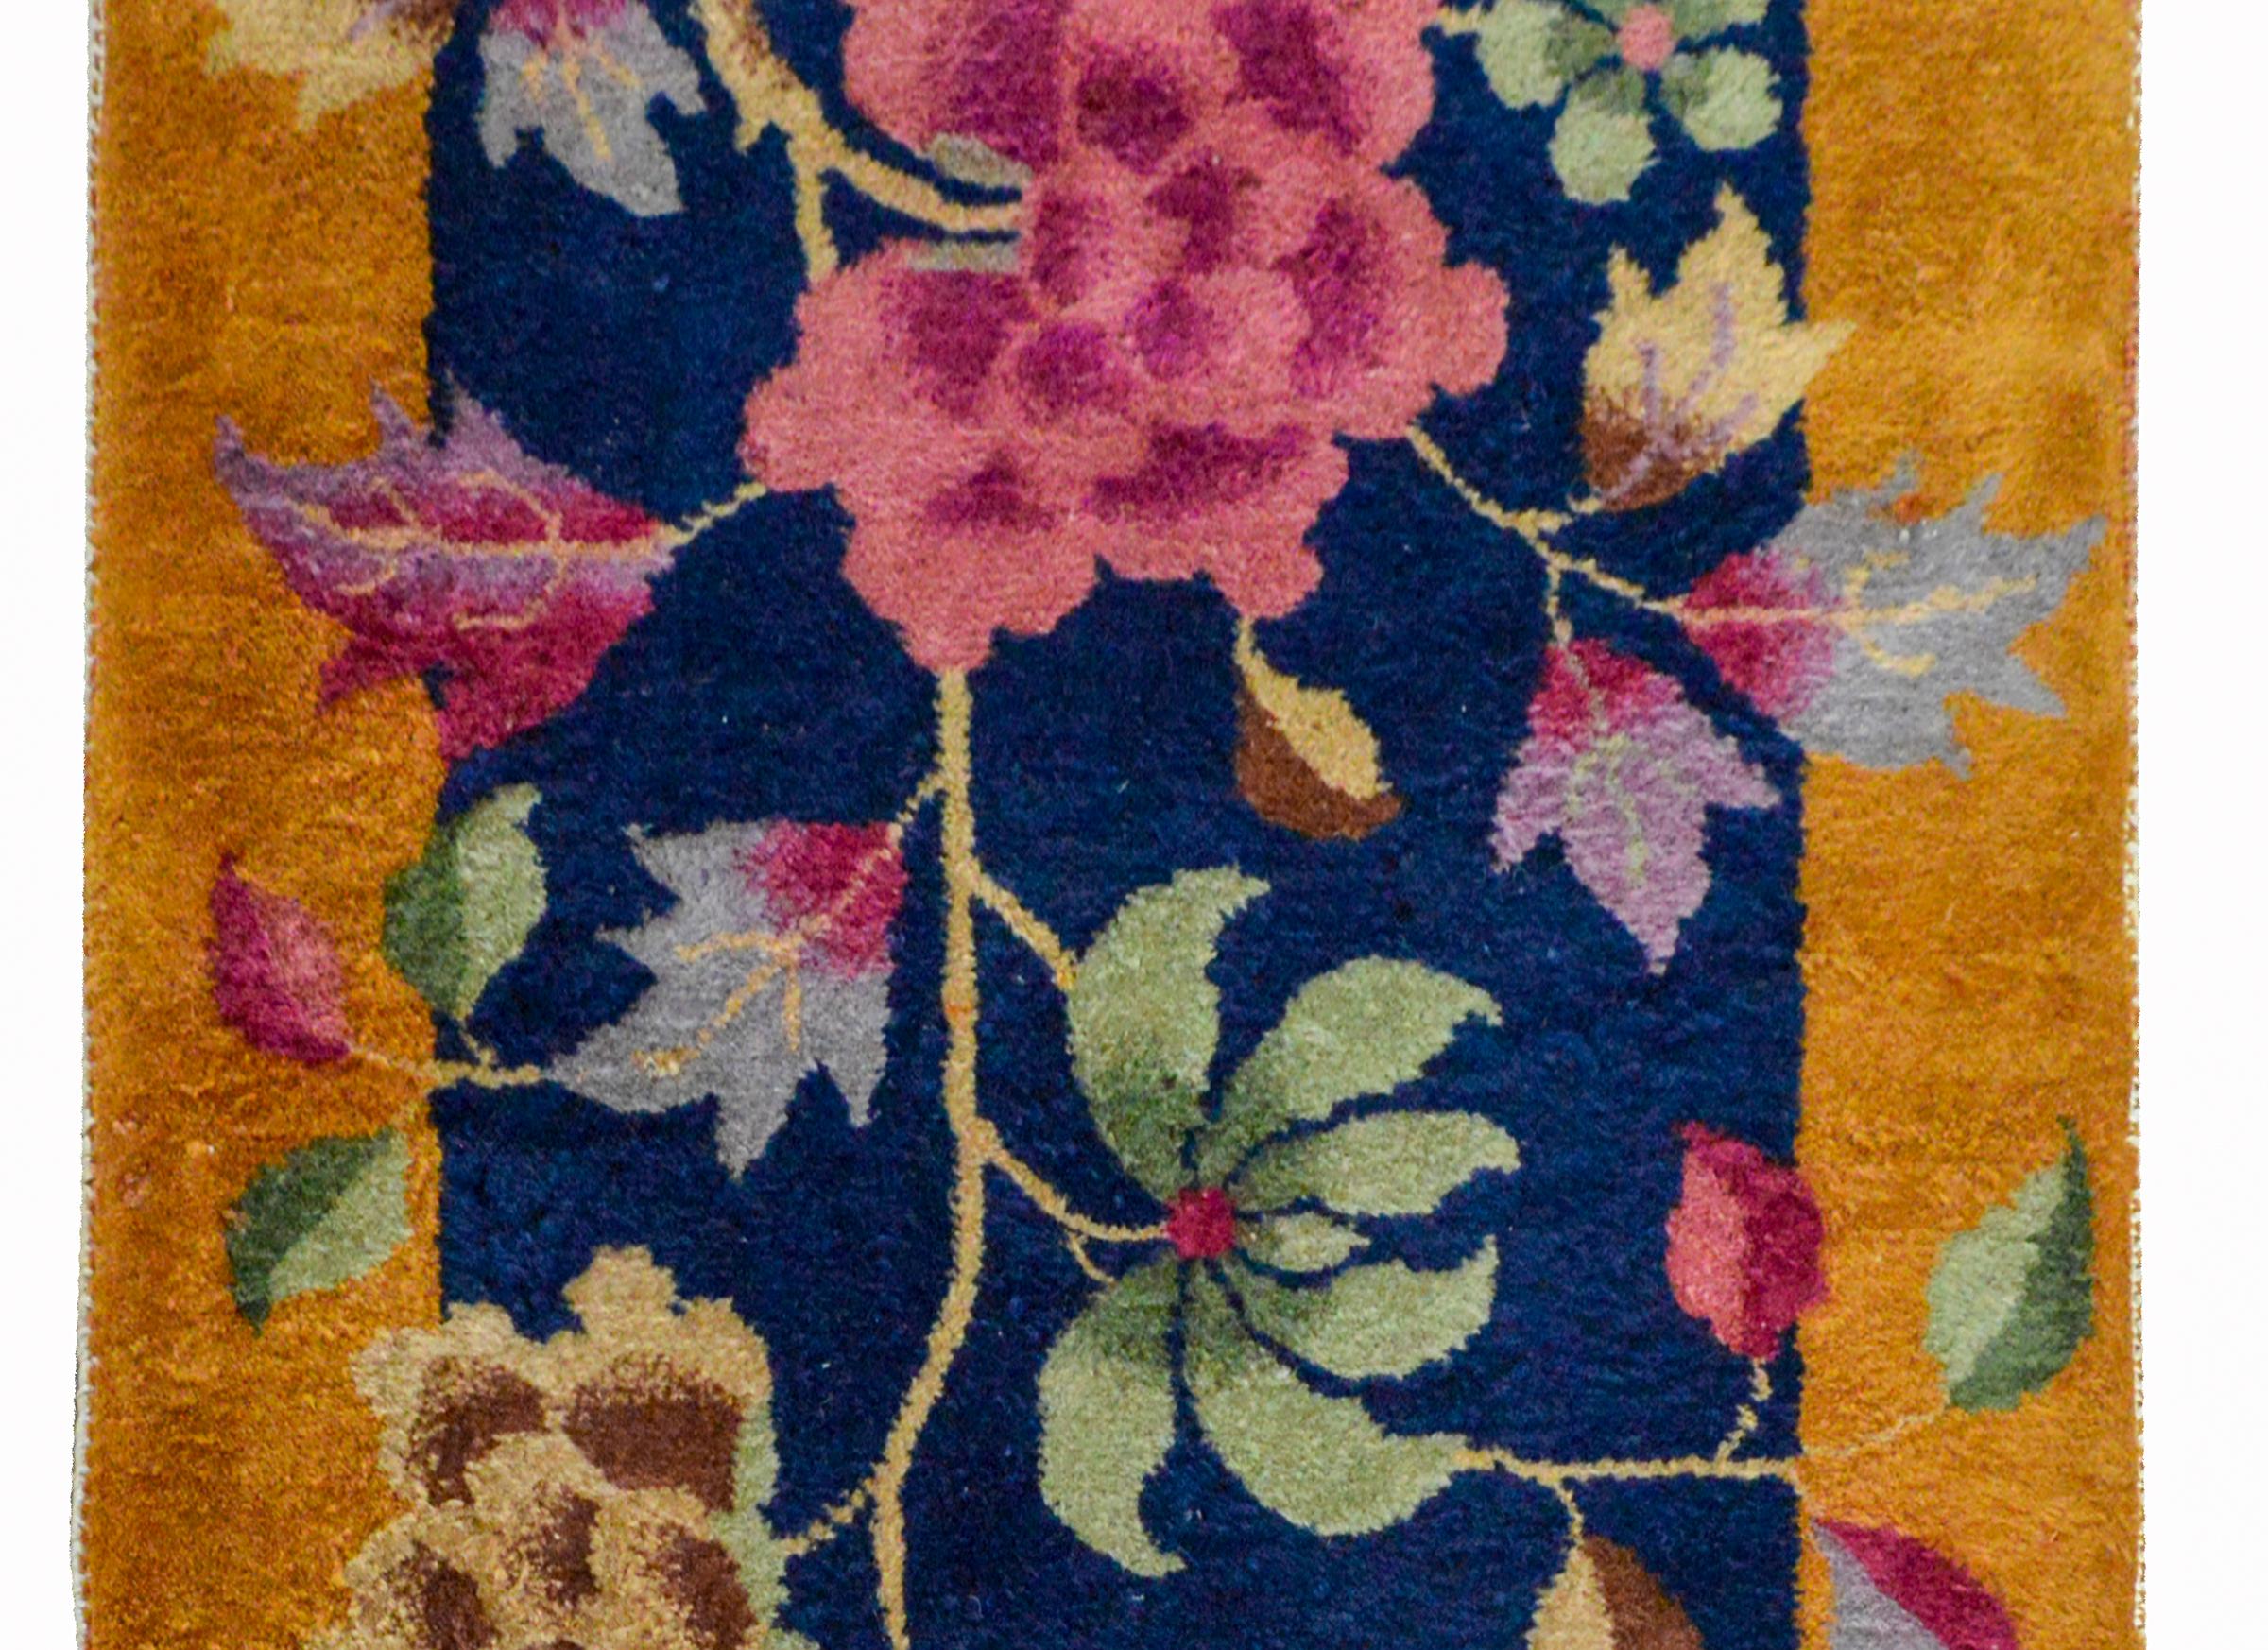 A bold early 20th century Chinese Art Deco rug with a large tree peony woven in myriad colors including pink, cream, green, indigo, and violet, against a dark indigo background and surrounded by a wide gold border.